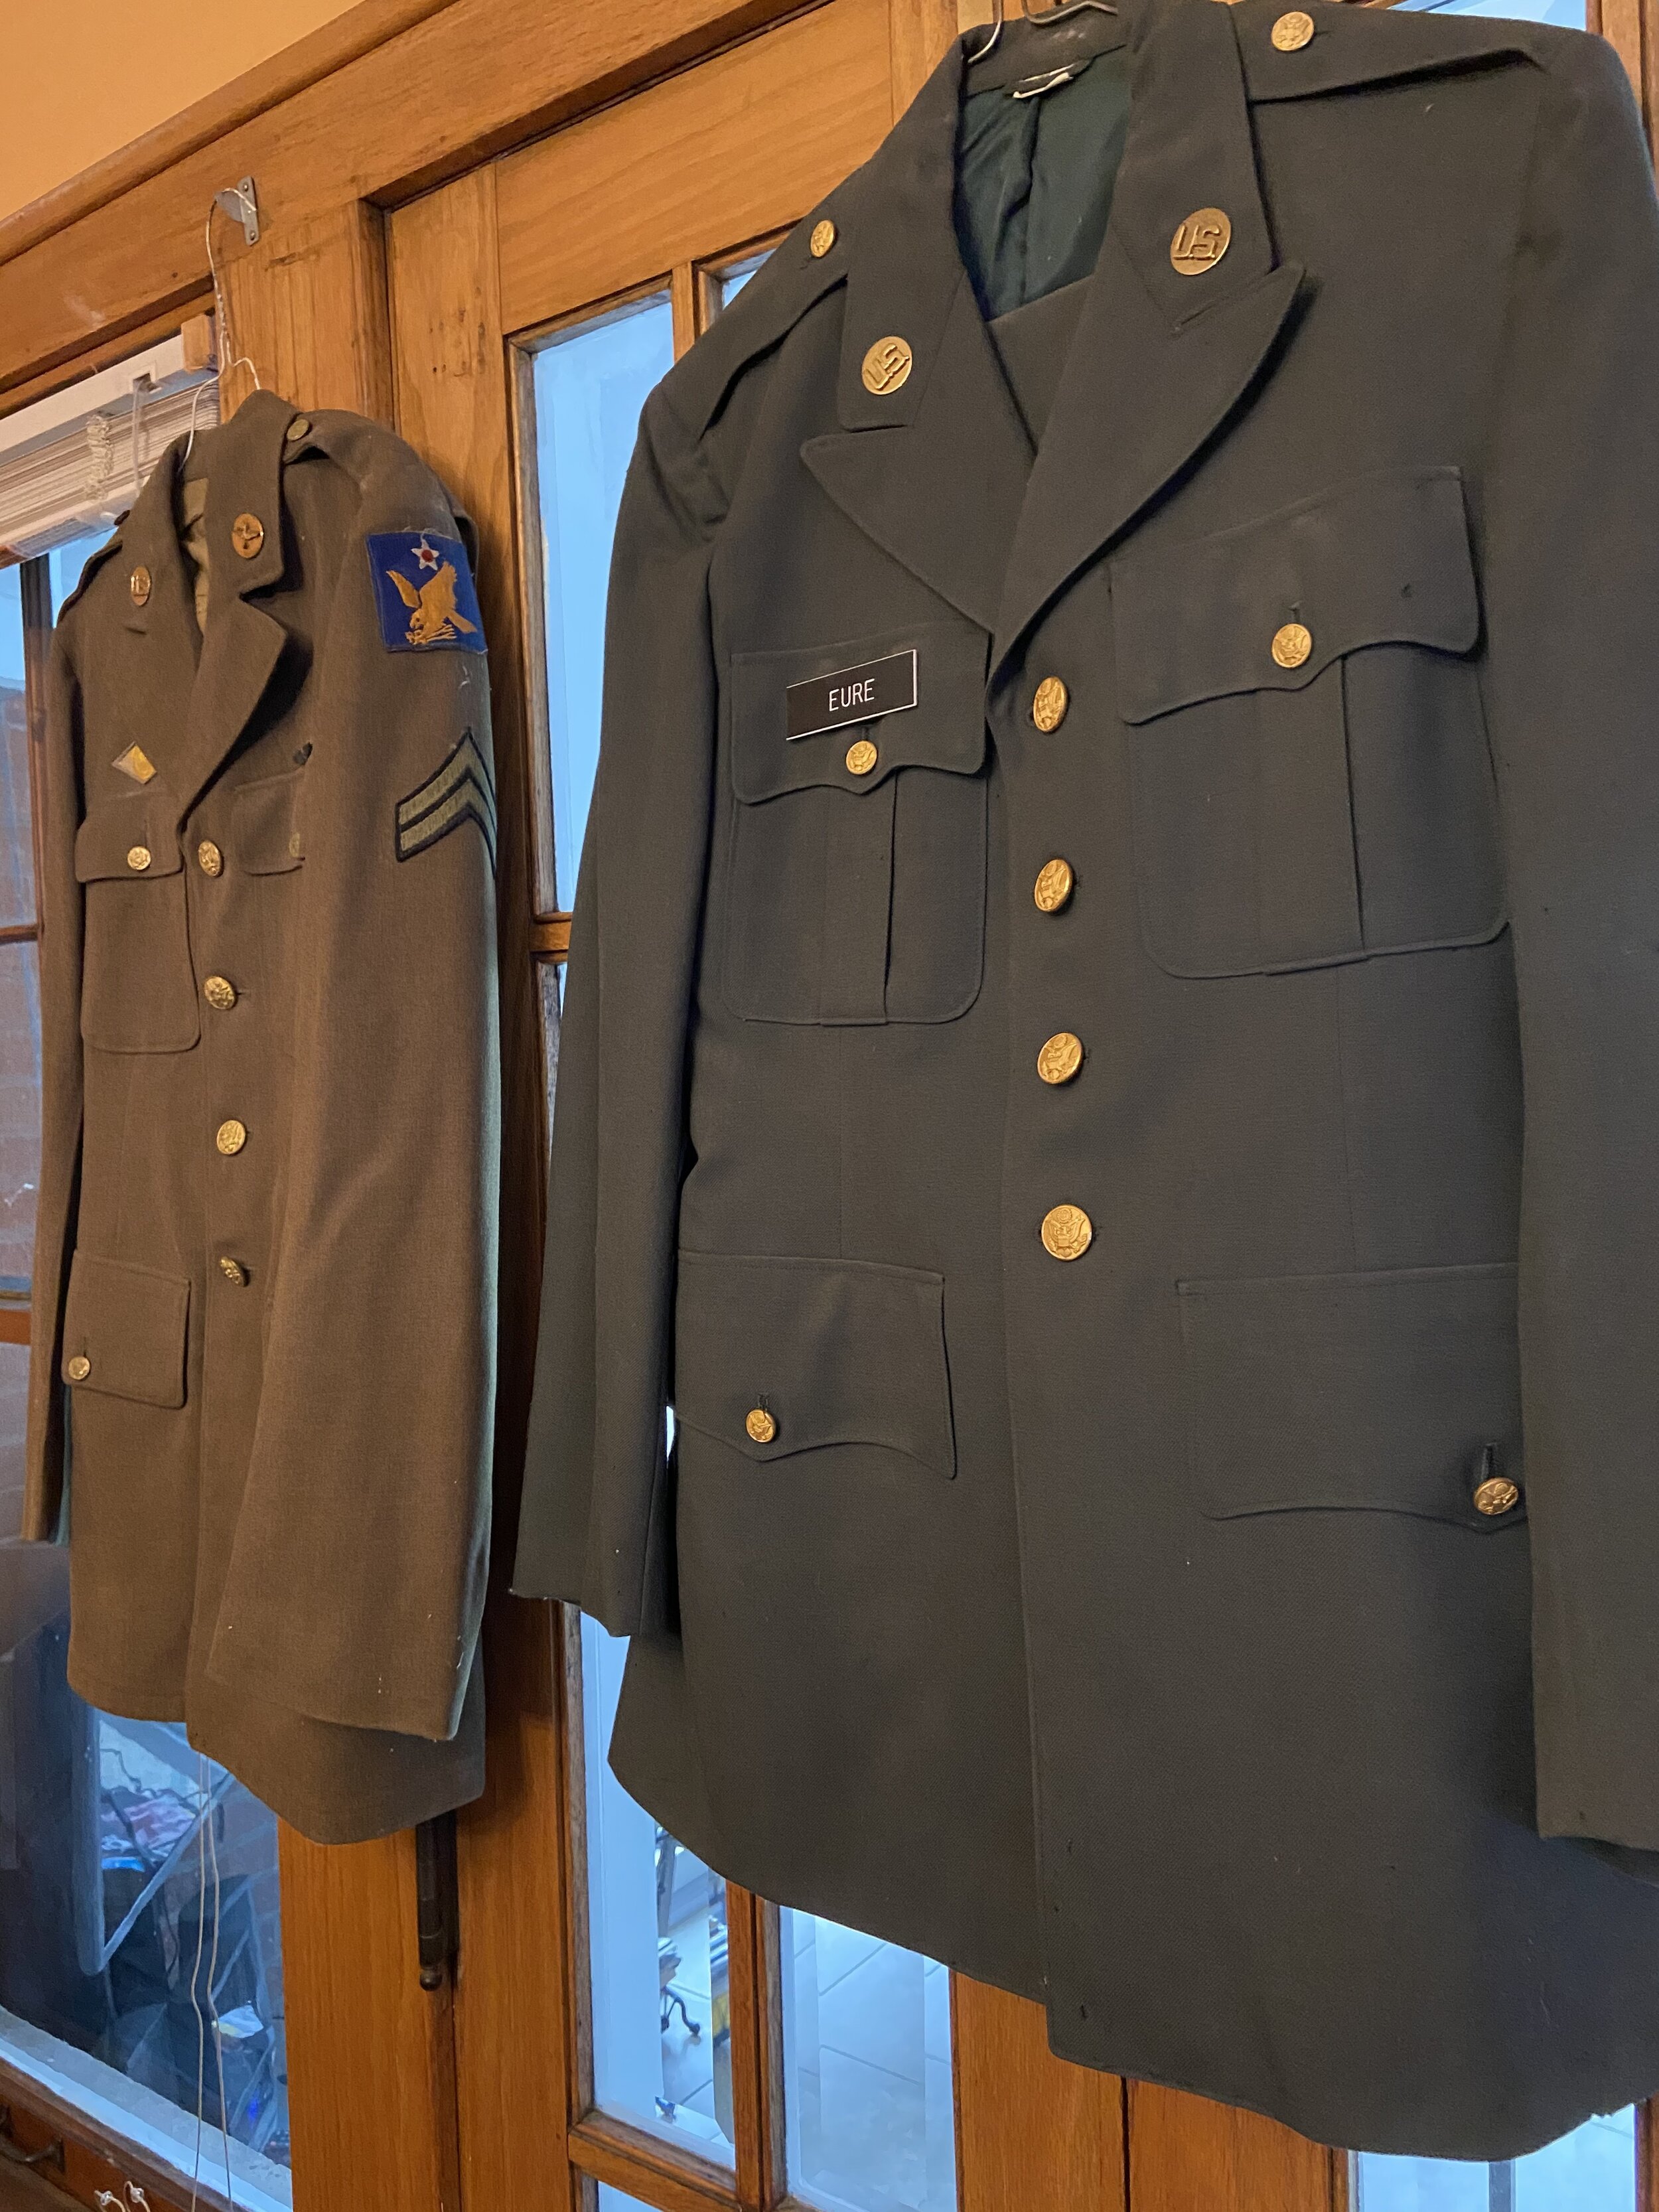 The U.S. Army uniforms of Albert Eure and his son Darryl Eure. Phot credit: Eure family